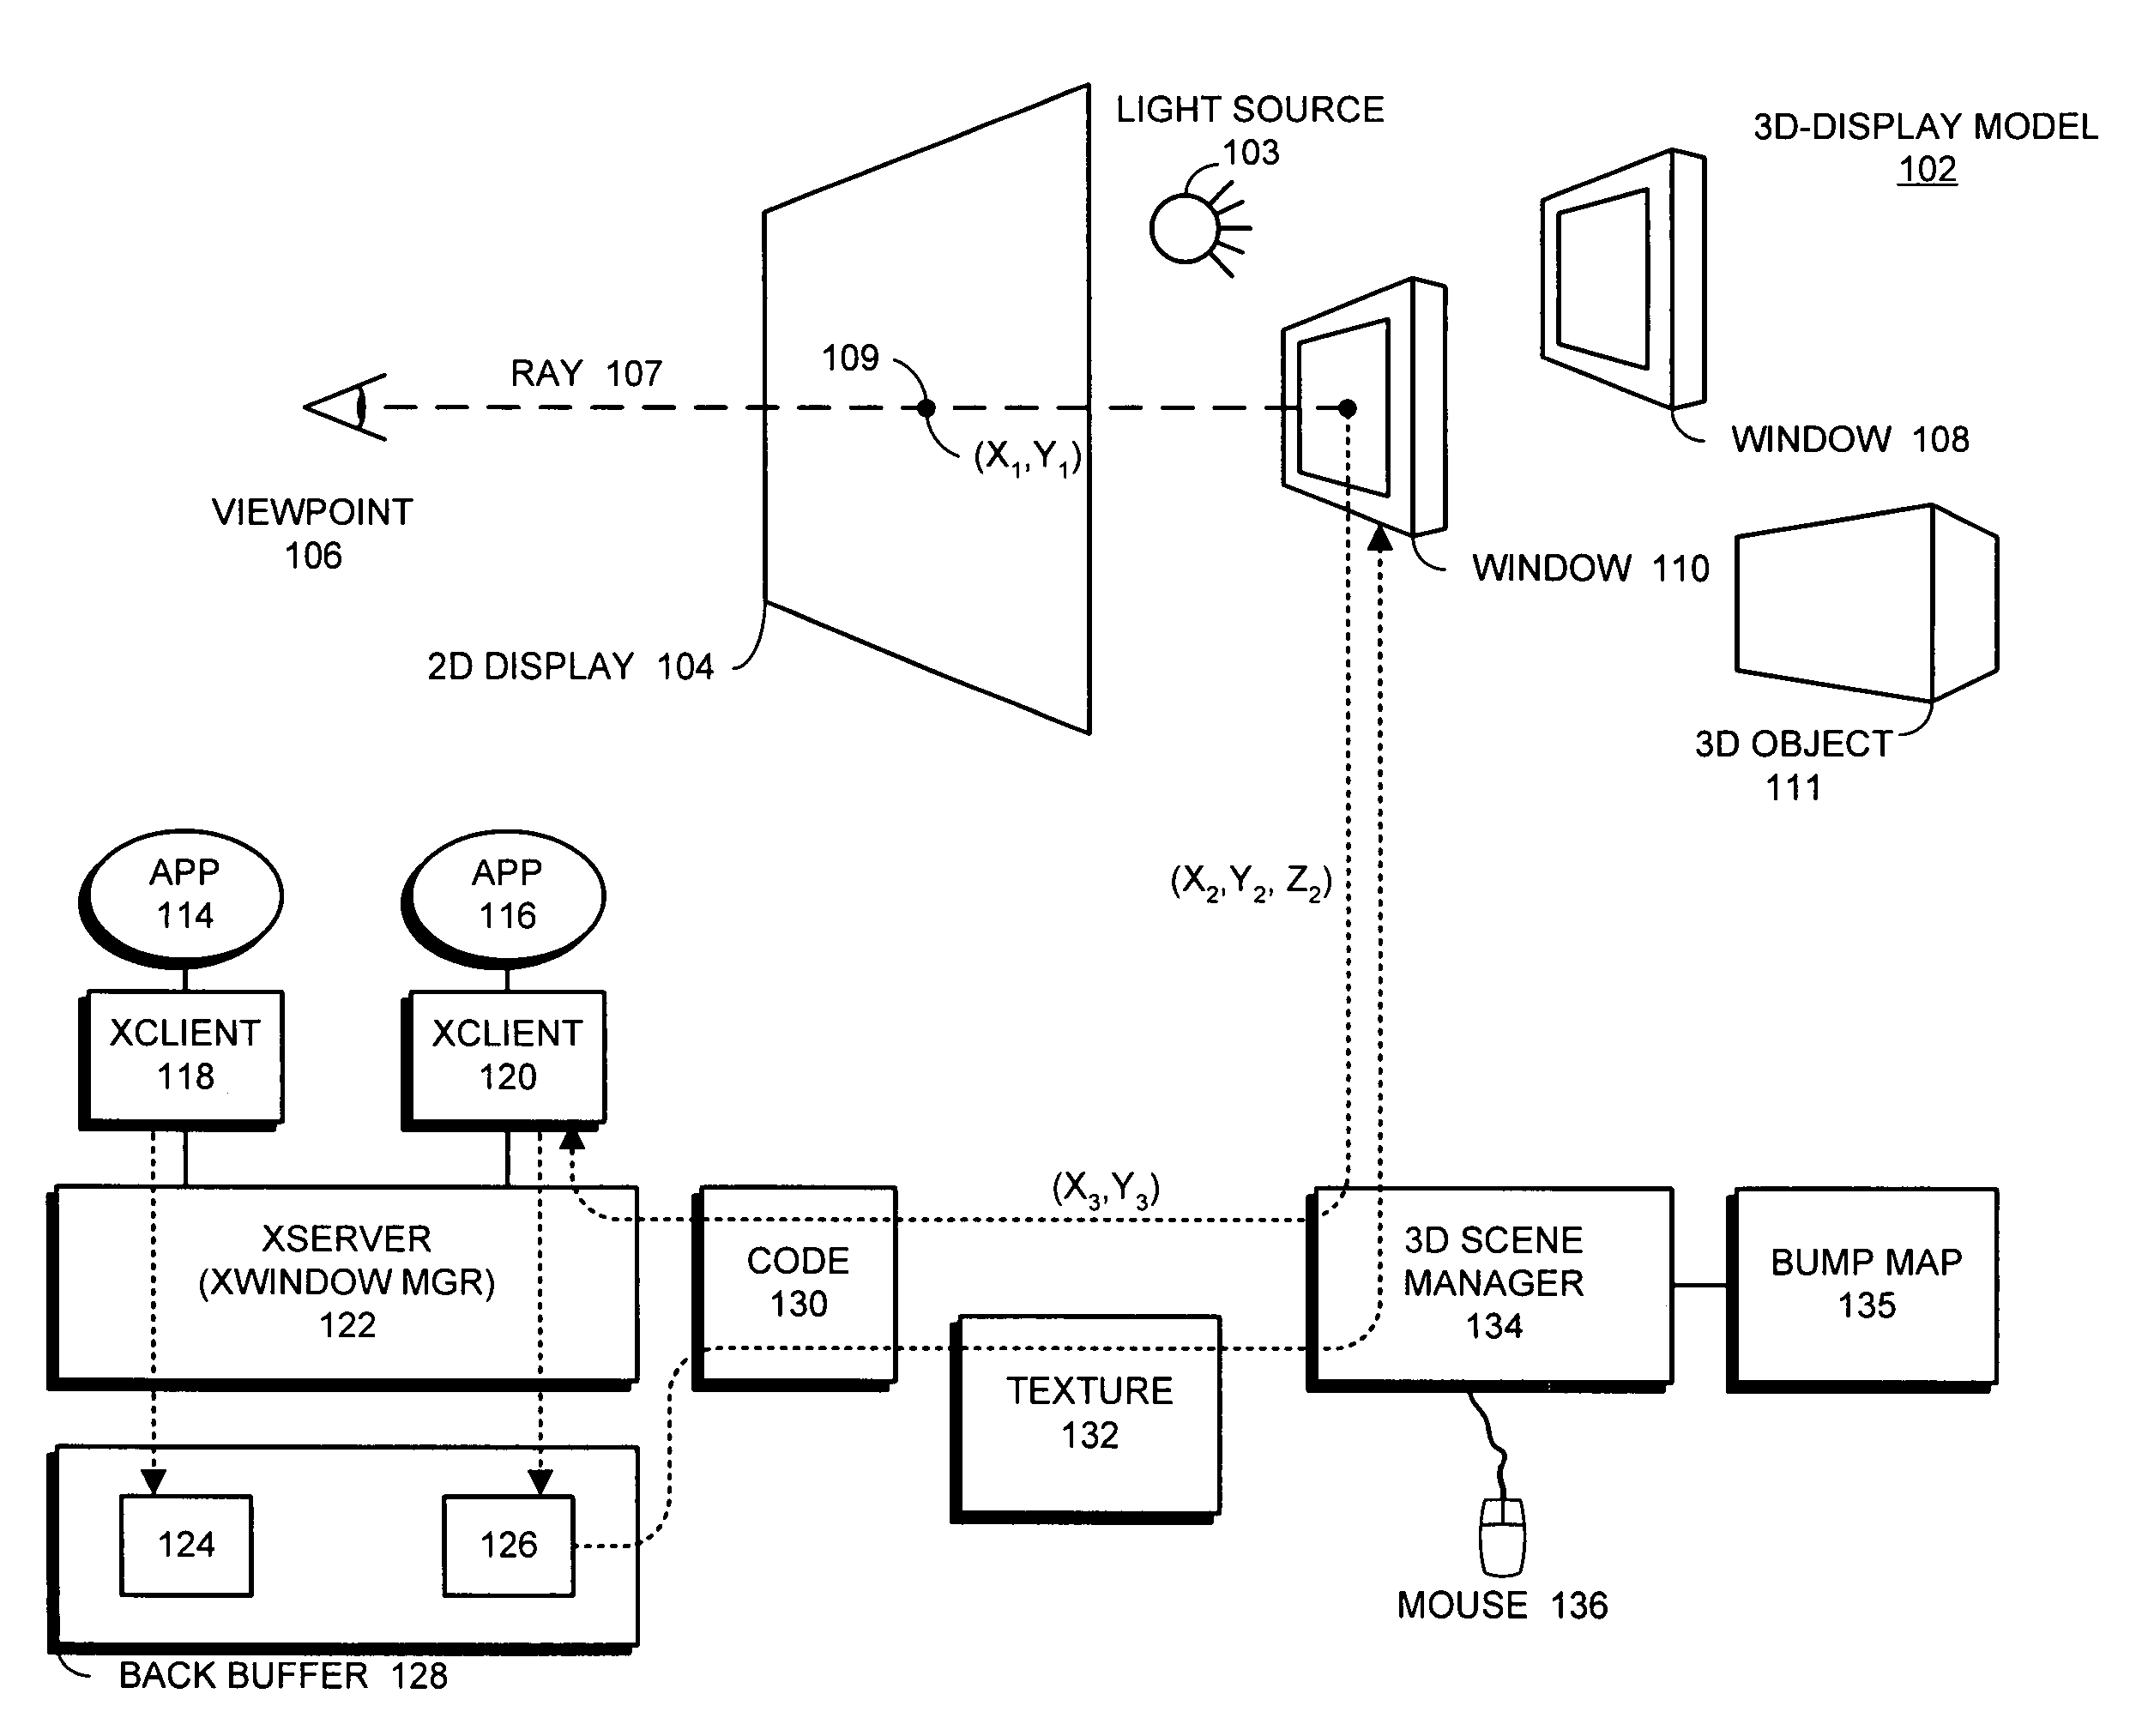 Method and apparatus for indicating a usage context of a computational resource through visual effects